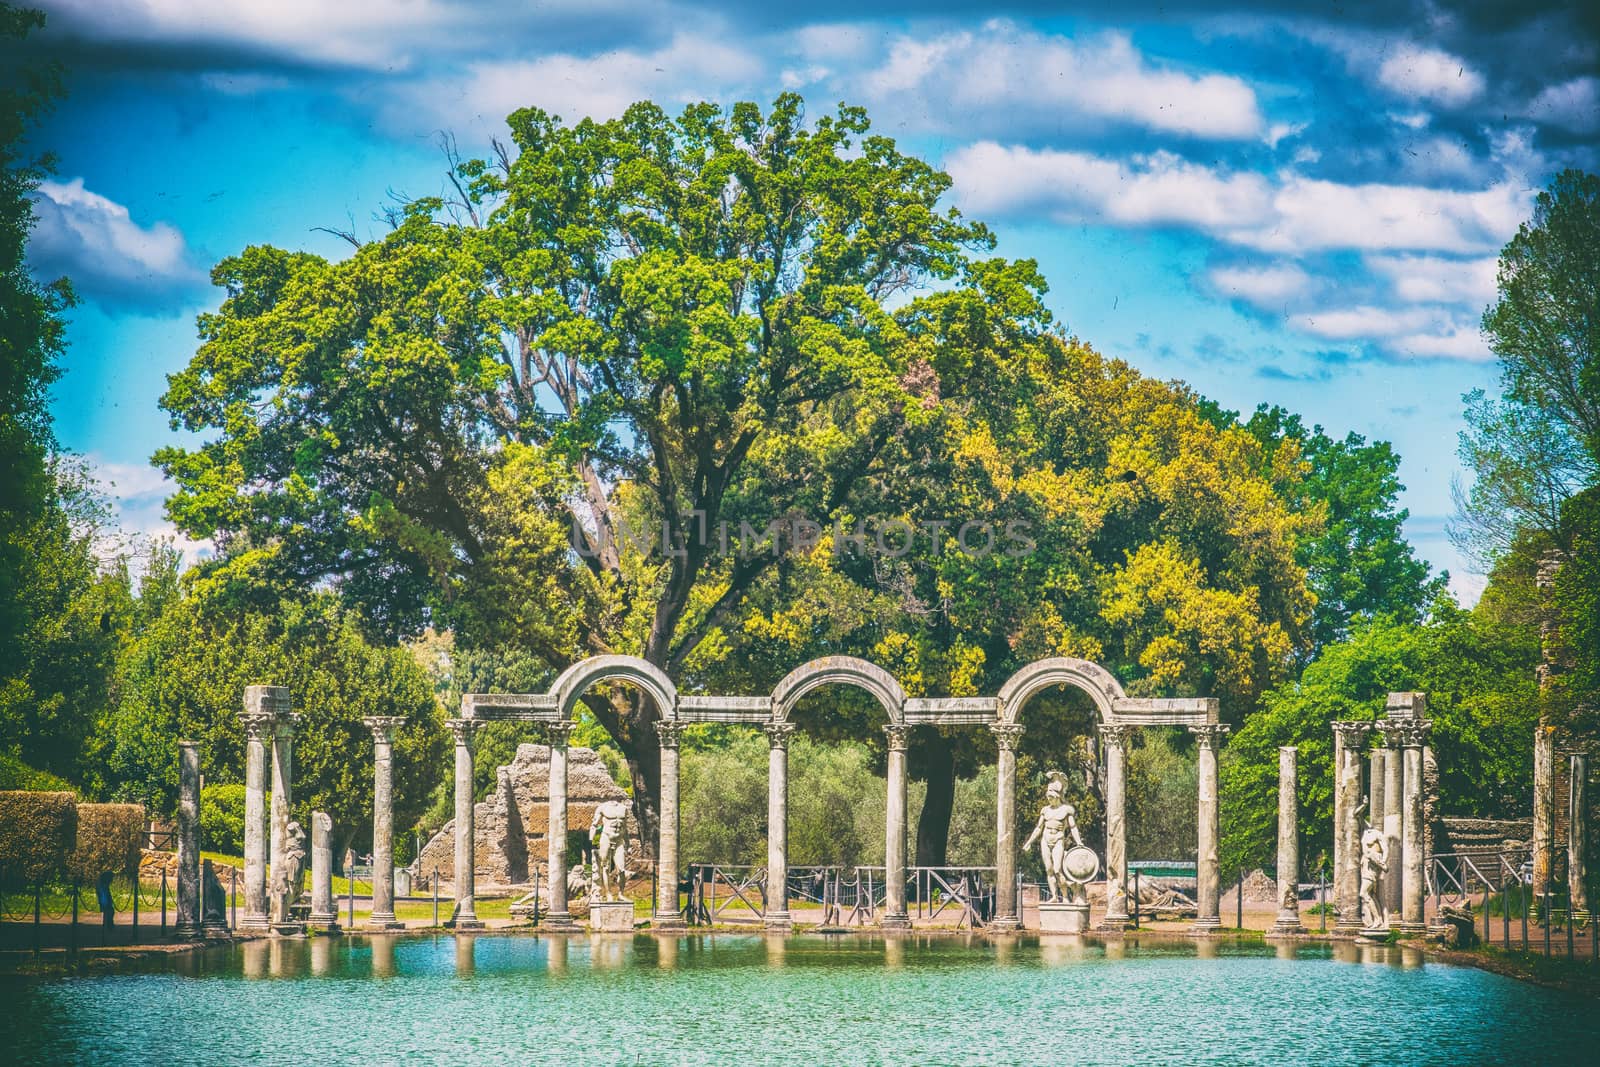 old fashioned film photographic shoot of Villa Adriana or Hadrians Villa in the Canopus area in Tivoli - Rome - Italy by LucaLorenzelli